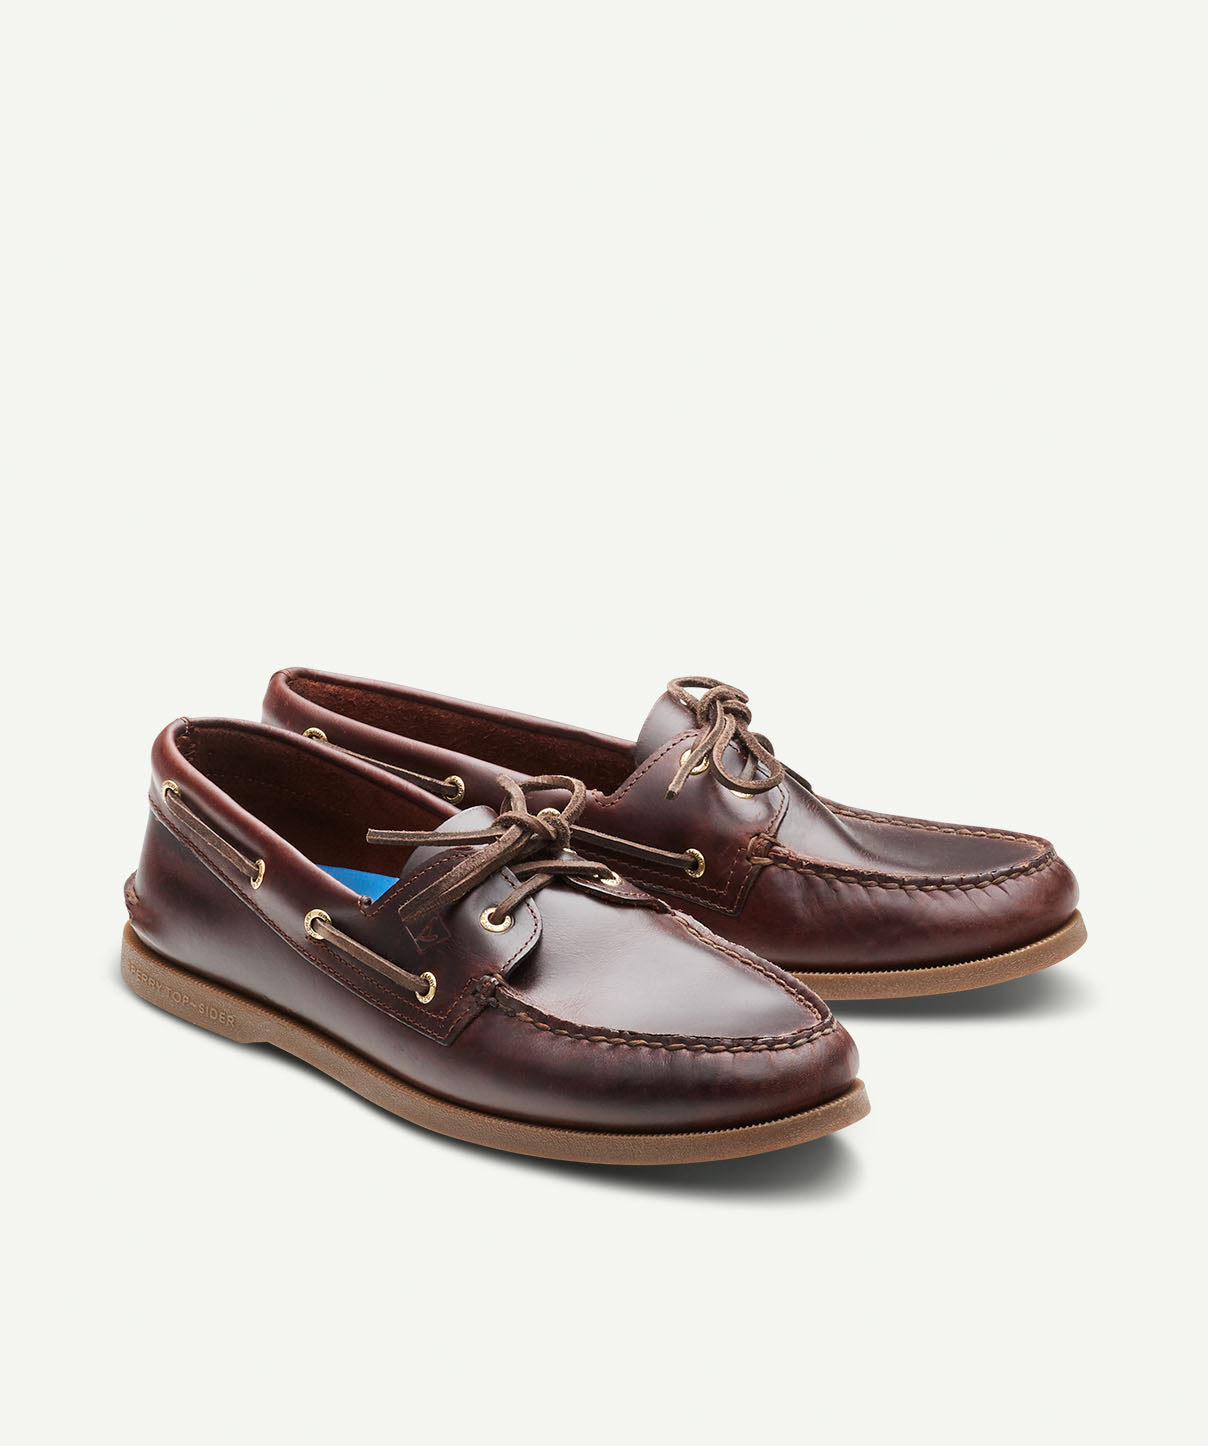 Sperry Boat Shoes - Amaretto | Shoes 